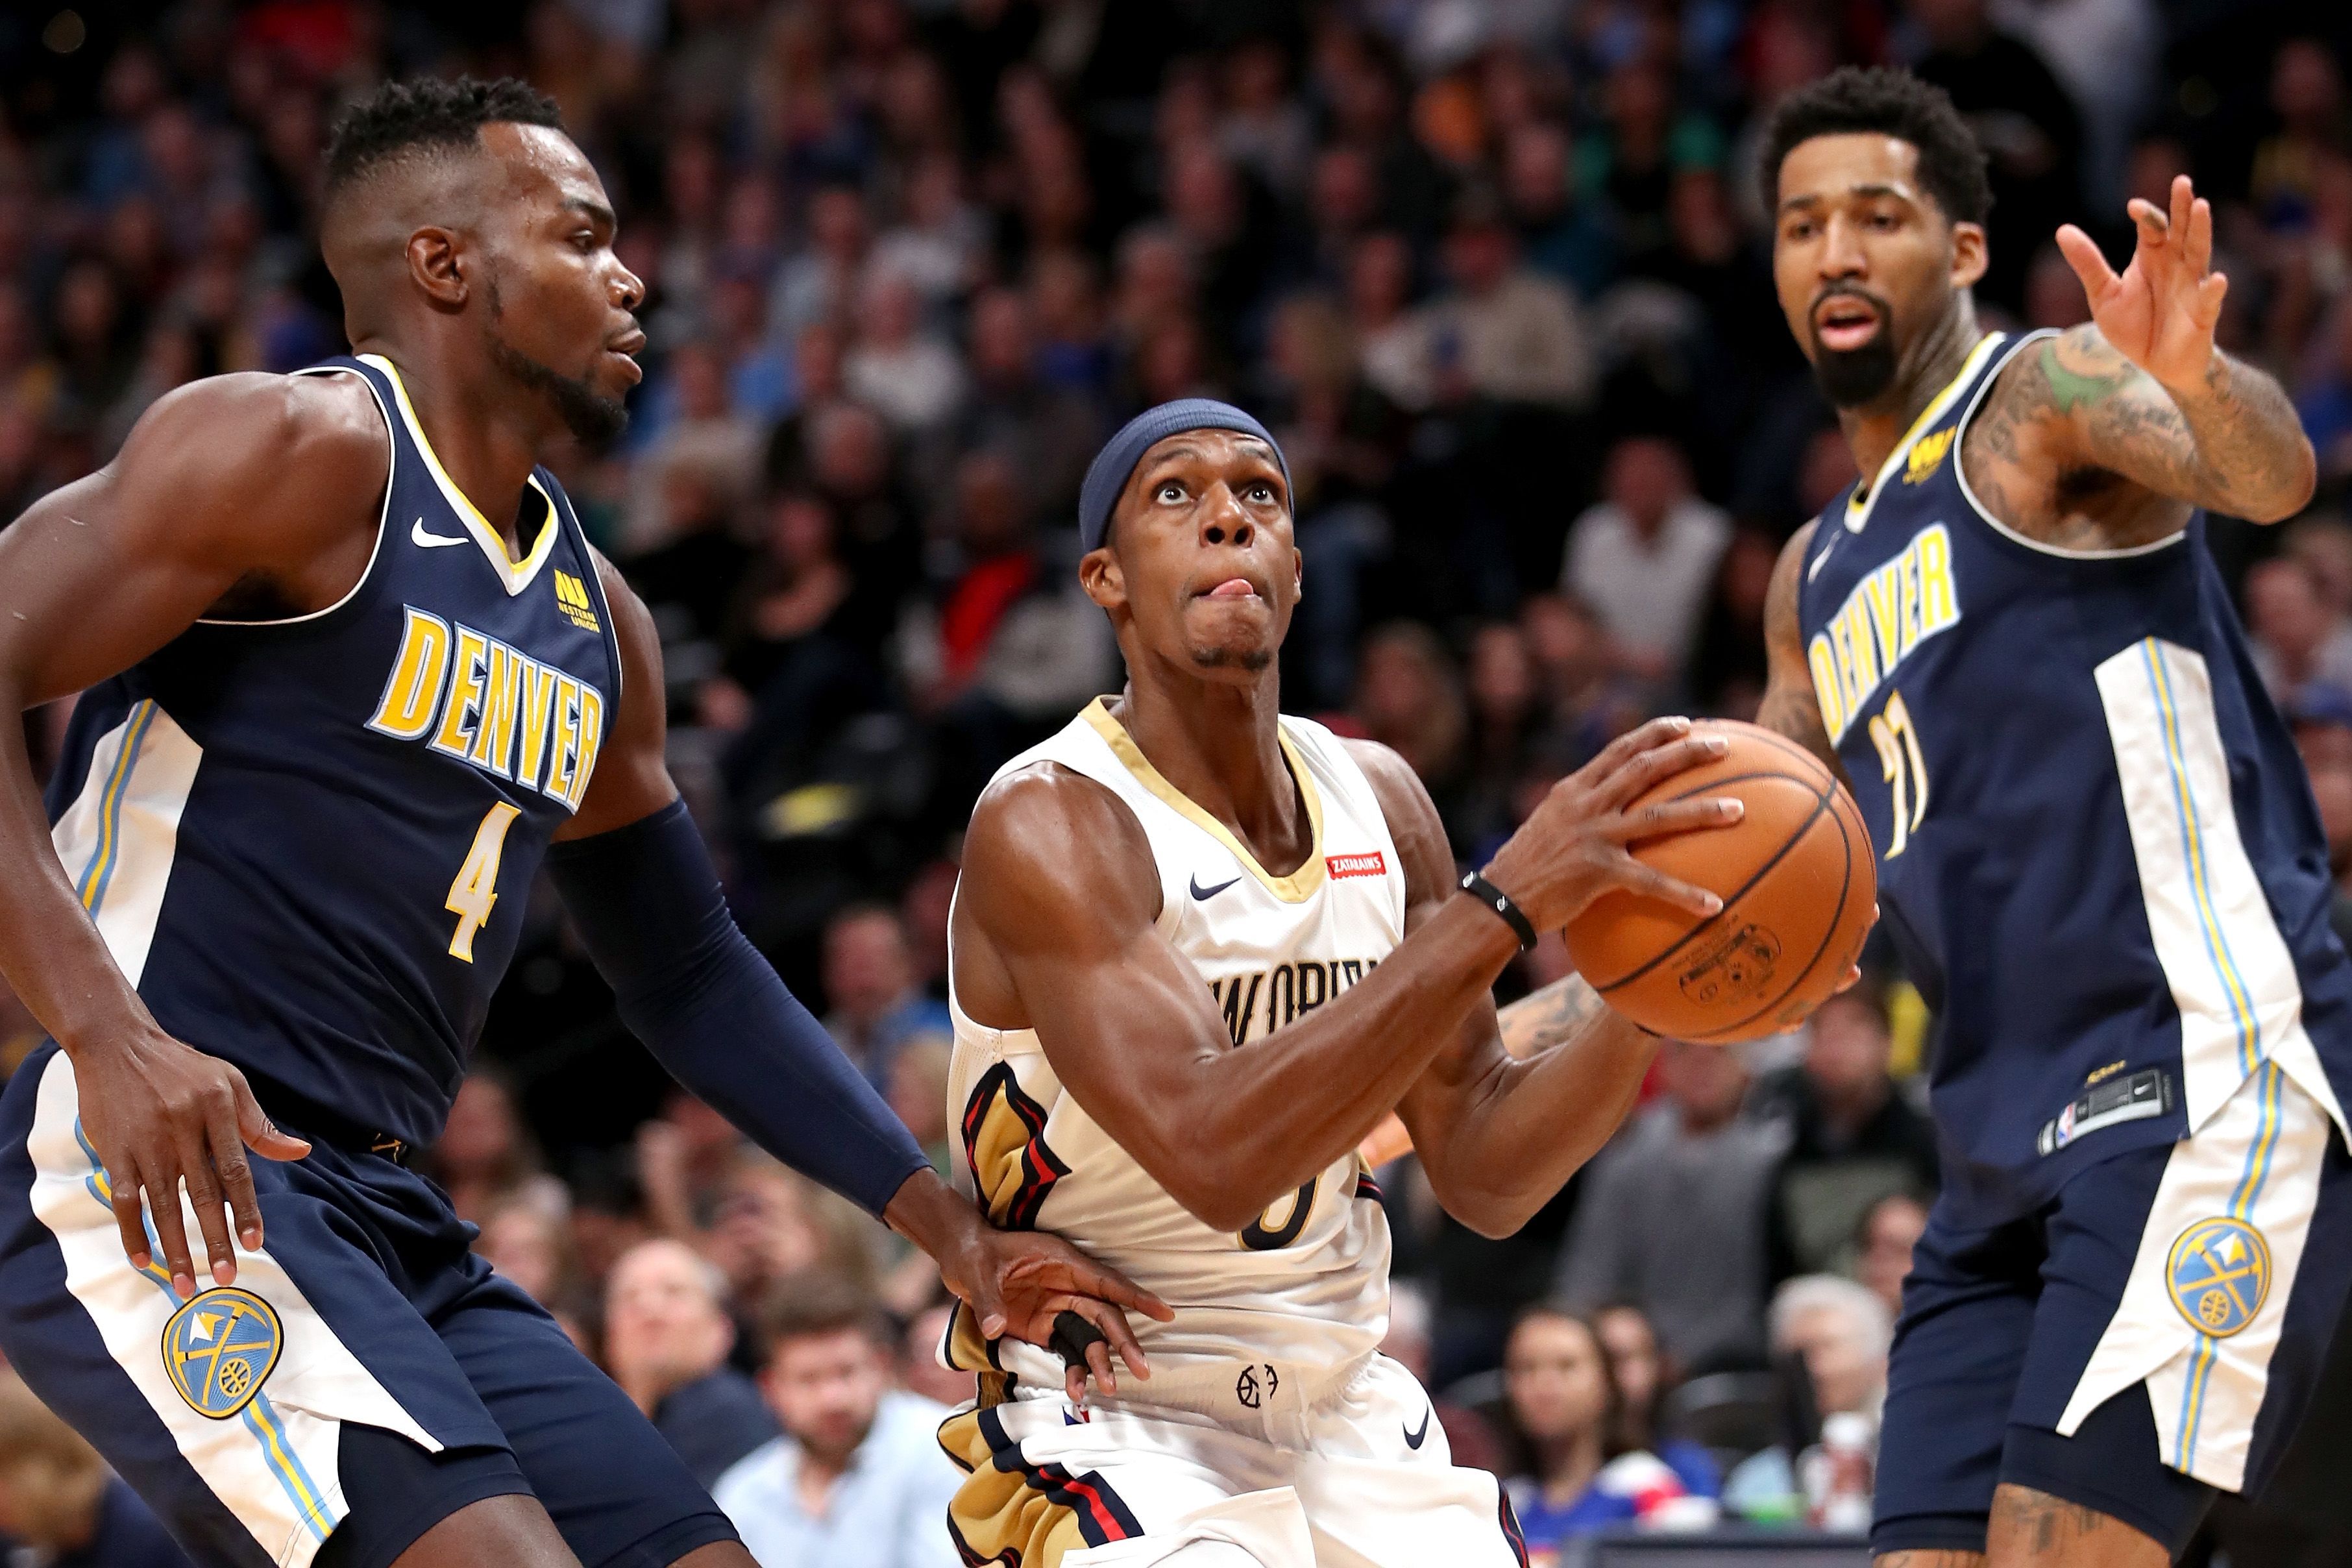 New Orleans Pelicans Player of the Week: Rajon Rondo